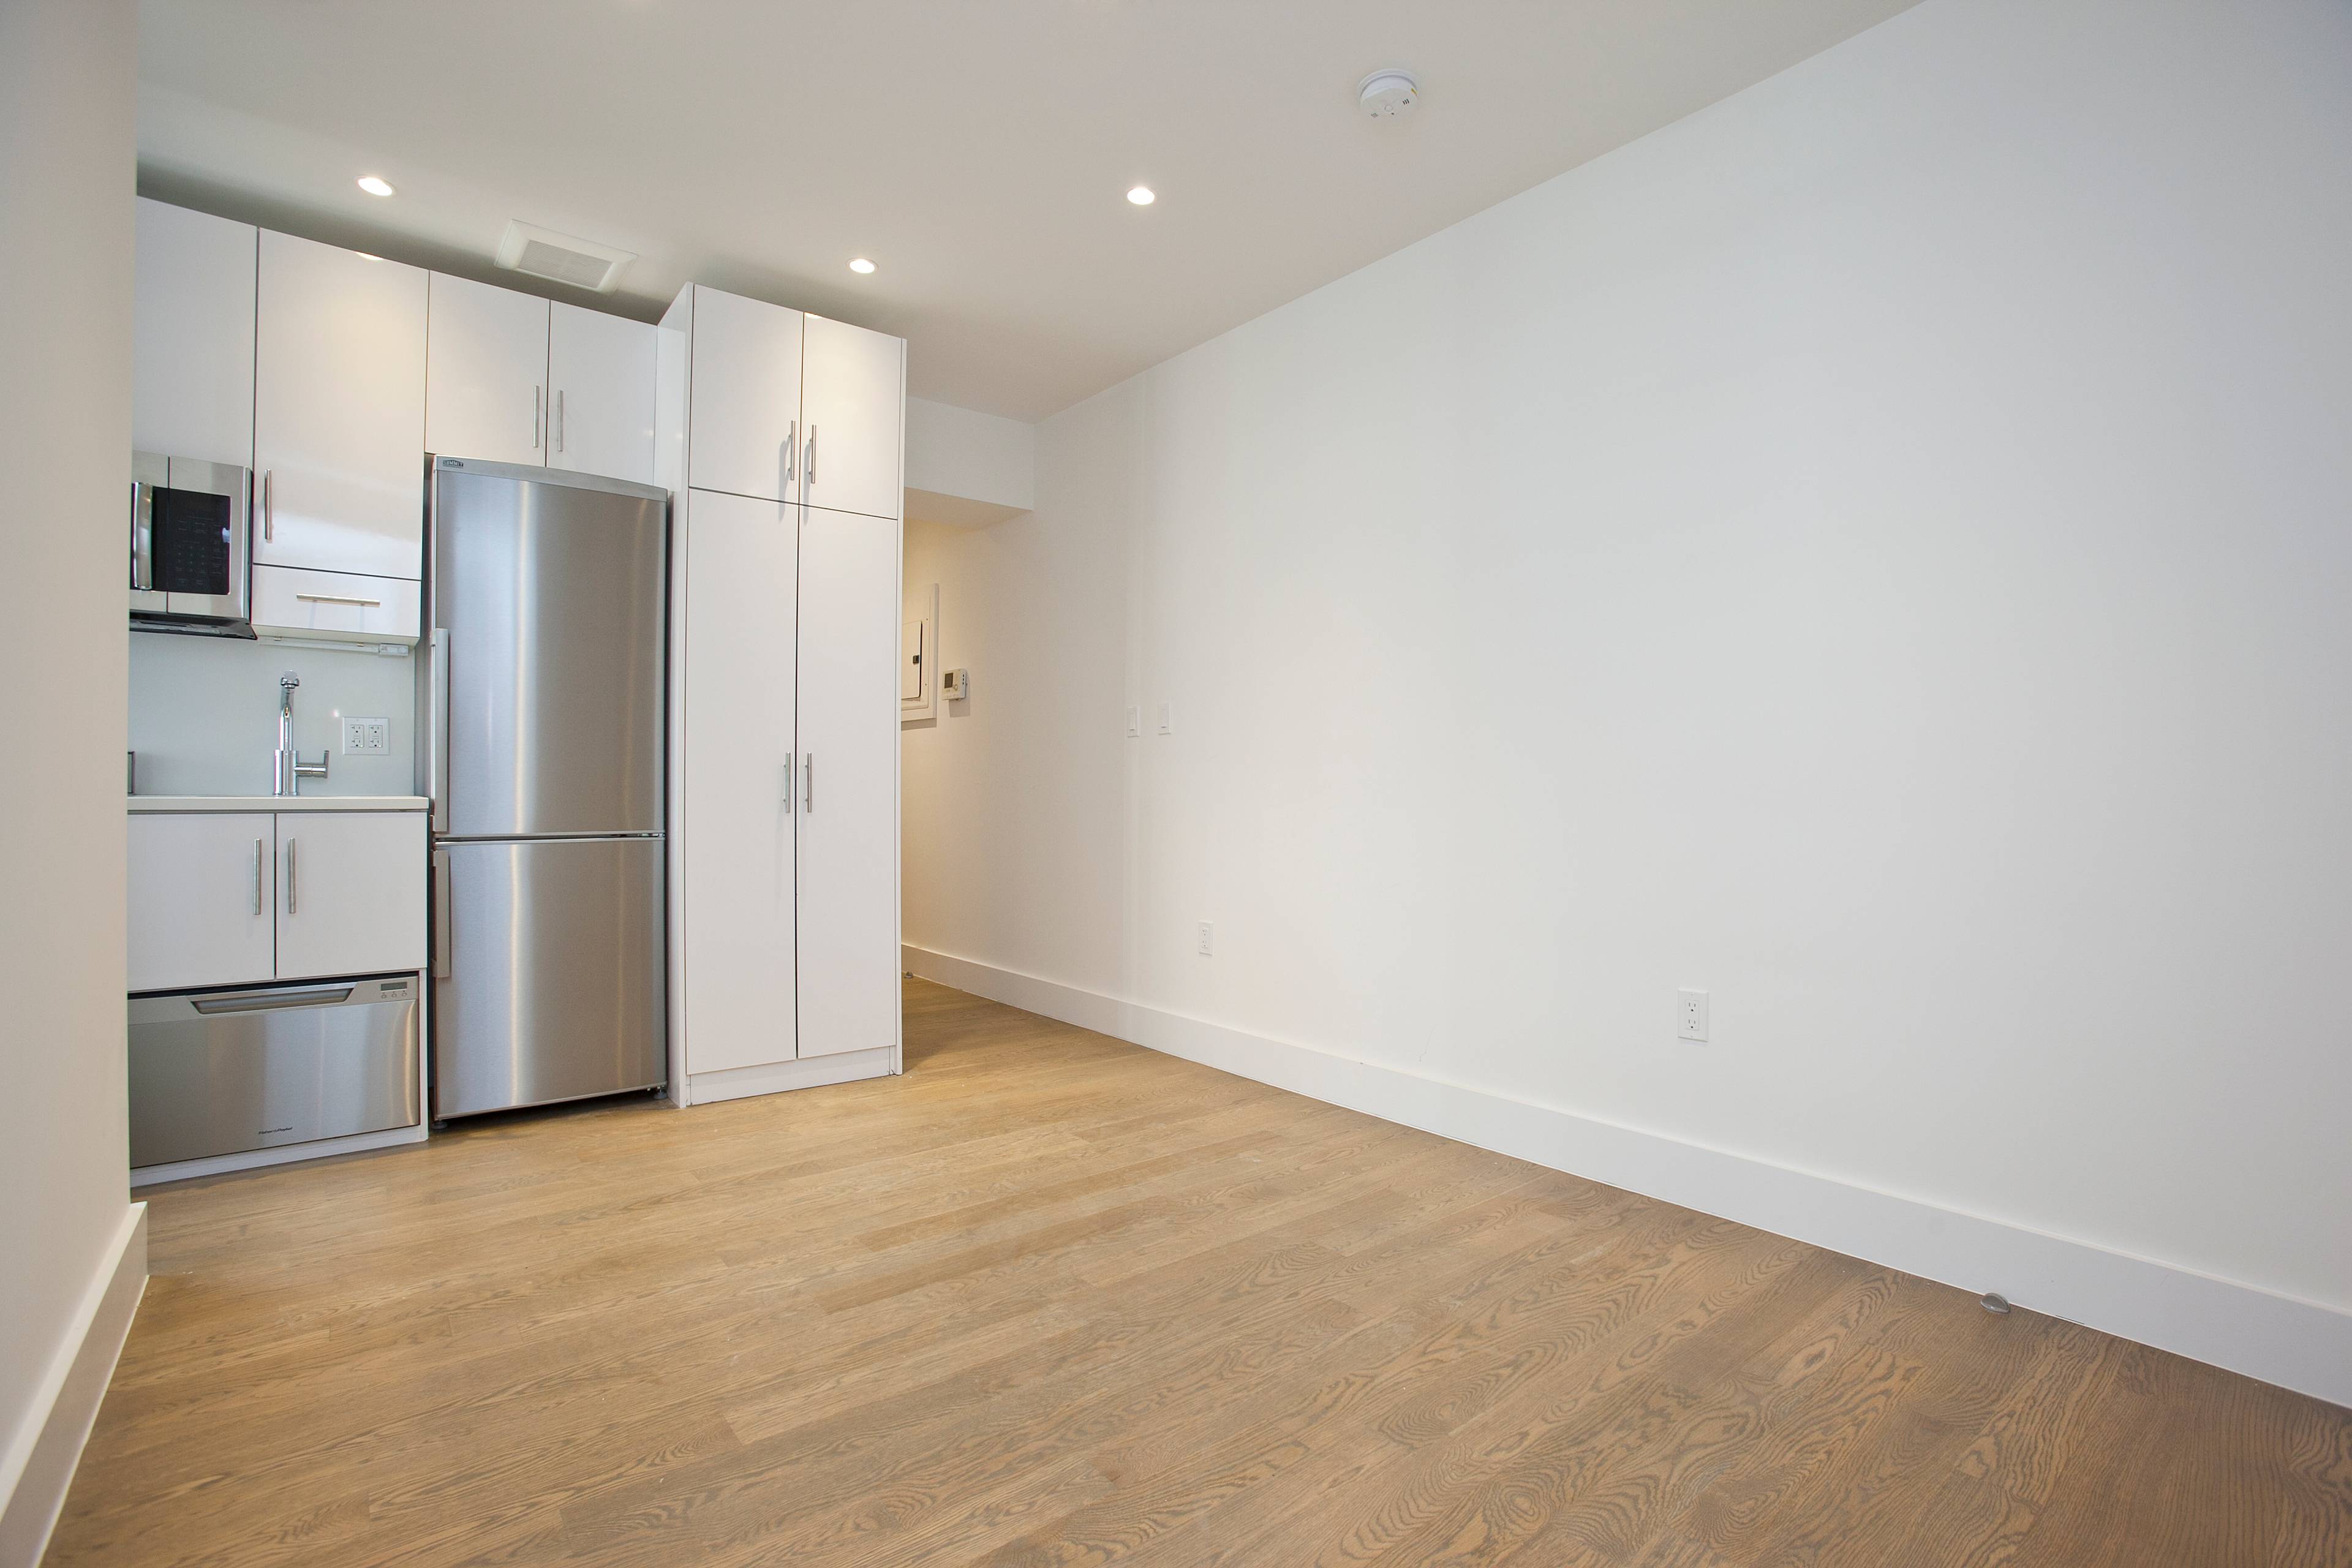 Beautiful Gut Renovated Three Bedroom Steps From Some Of The Cities Best Restaurants, Cafes and Nightlife.